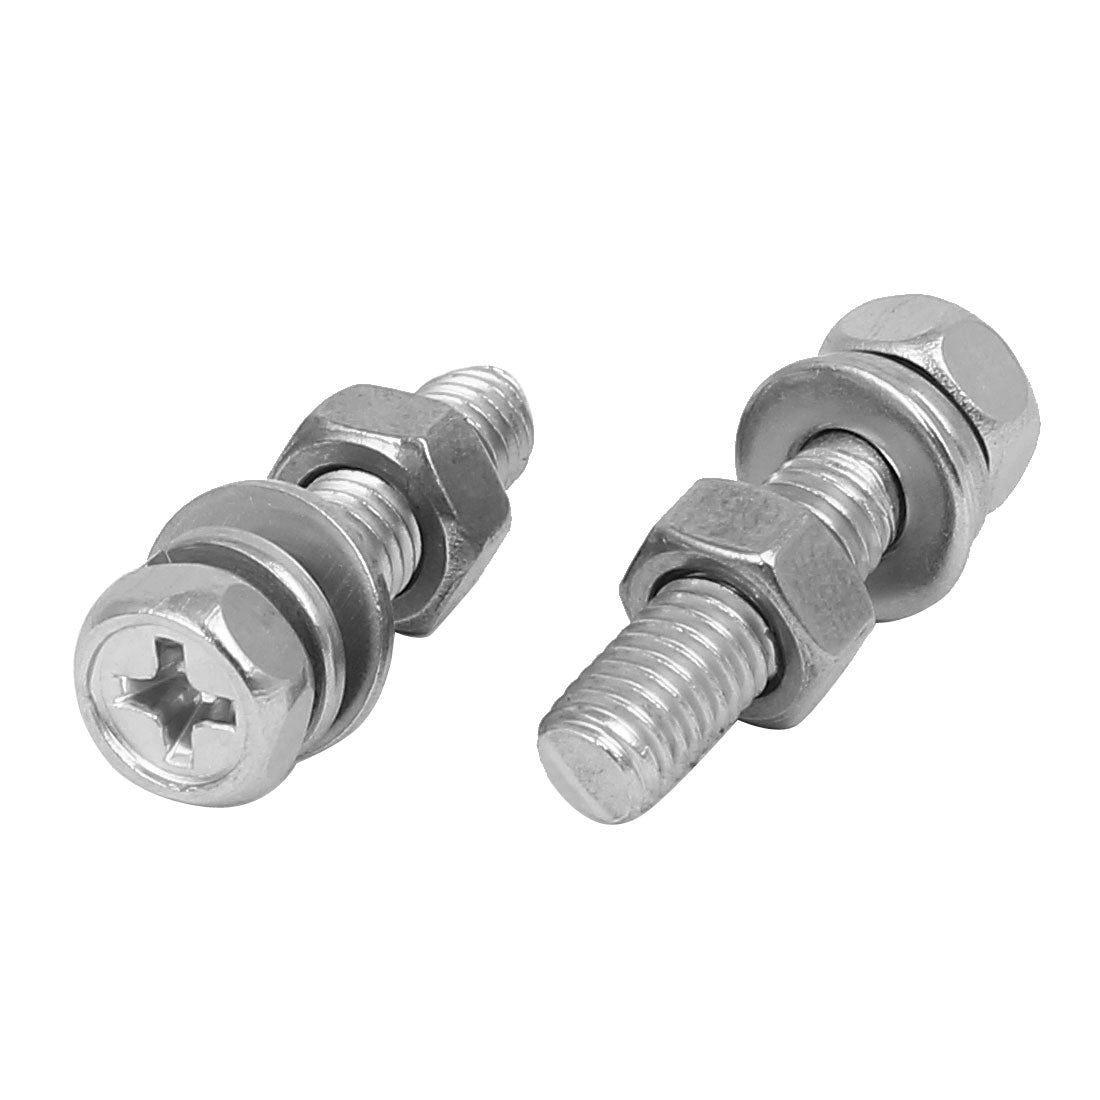 uxcell Uxcell M5 x 25mm 304 Stainless Steel Phillips Hex Head Bolts Nuts w Washers 15 Sets